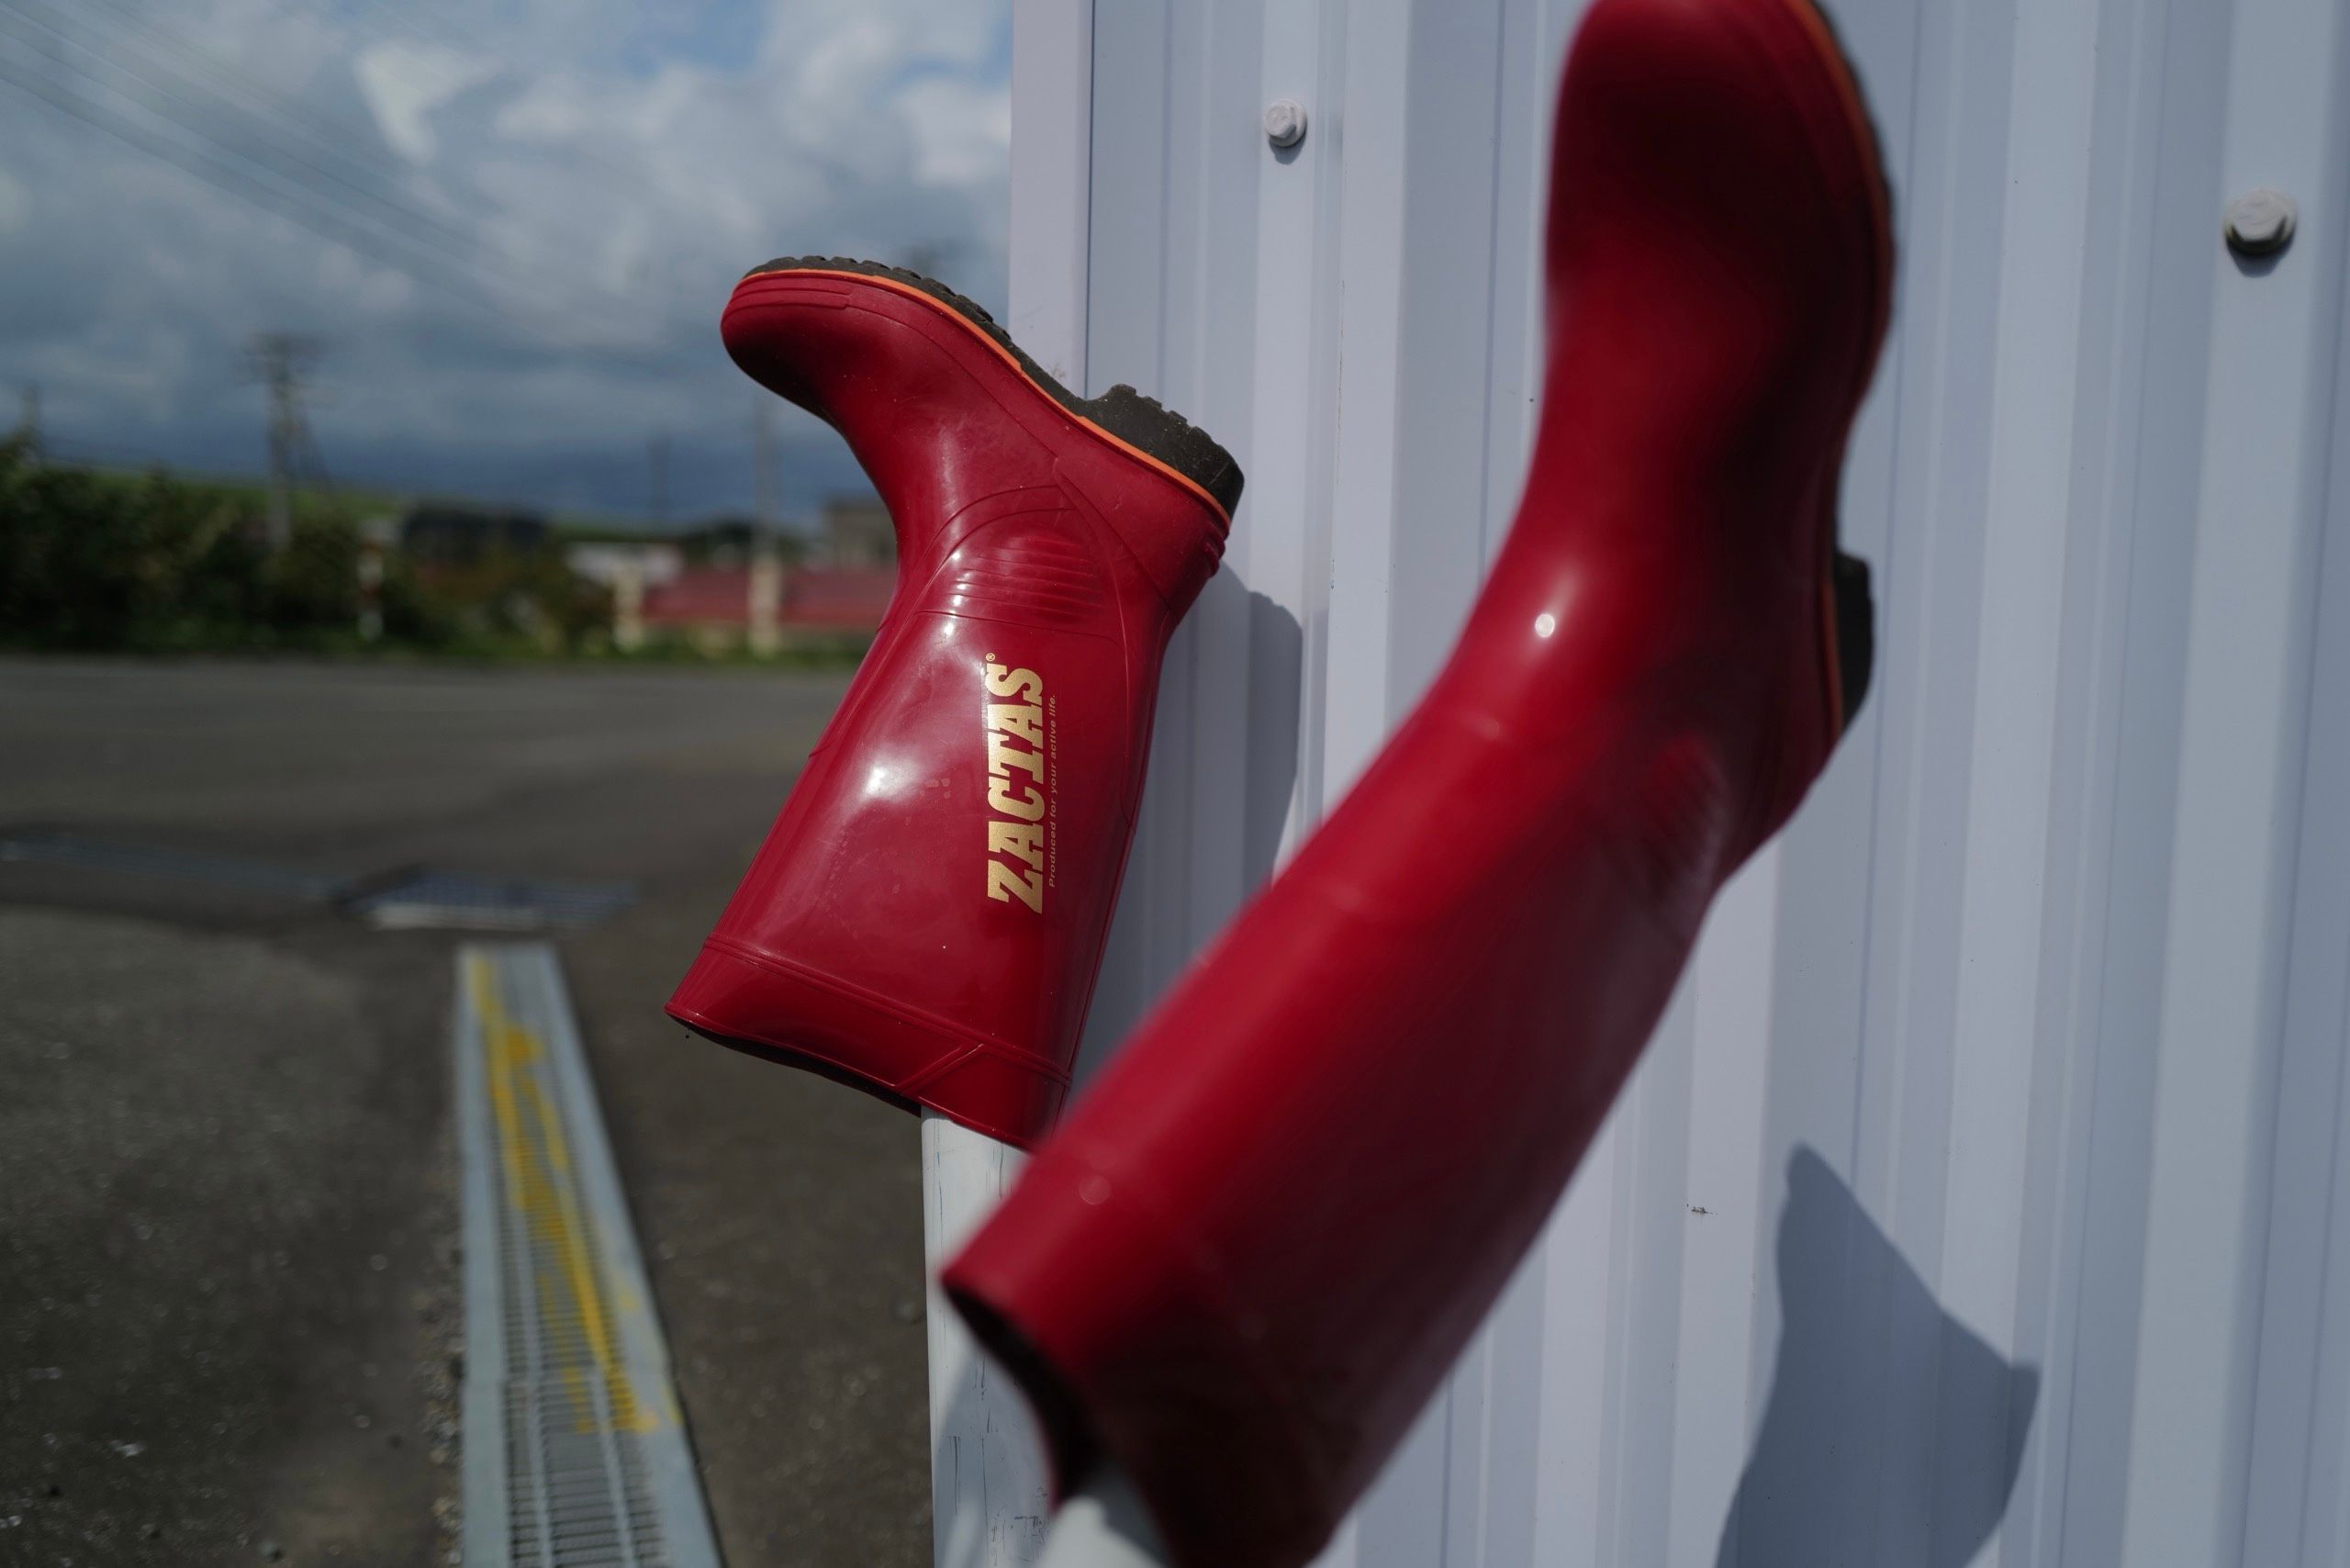 A pair of red rubber boots drying in the sun